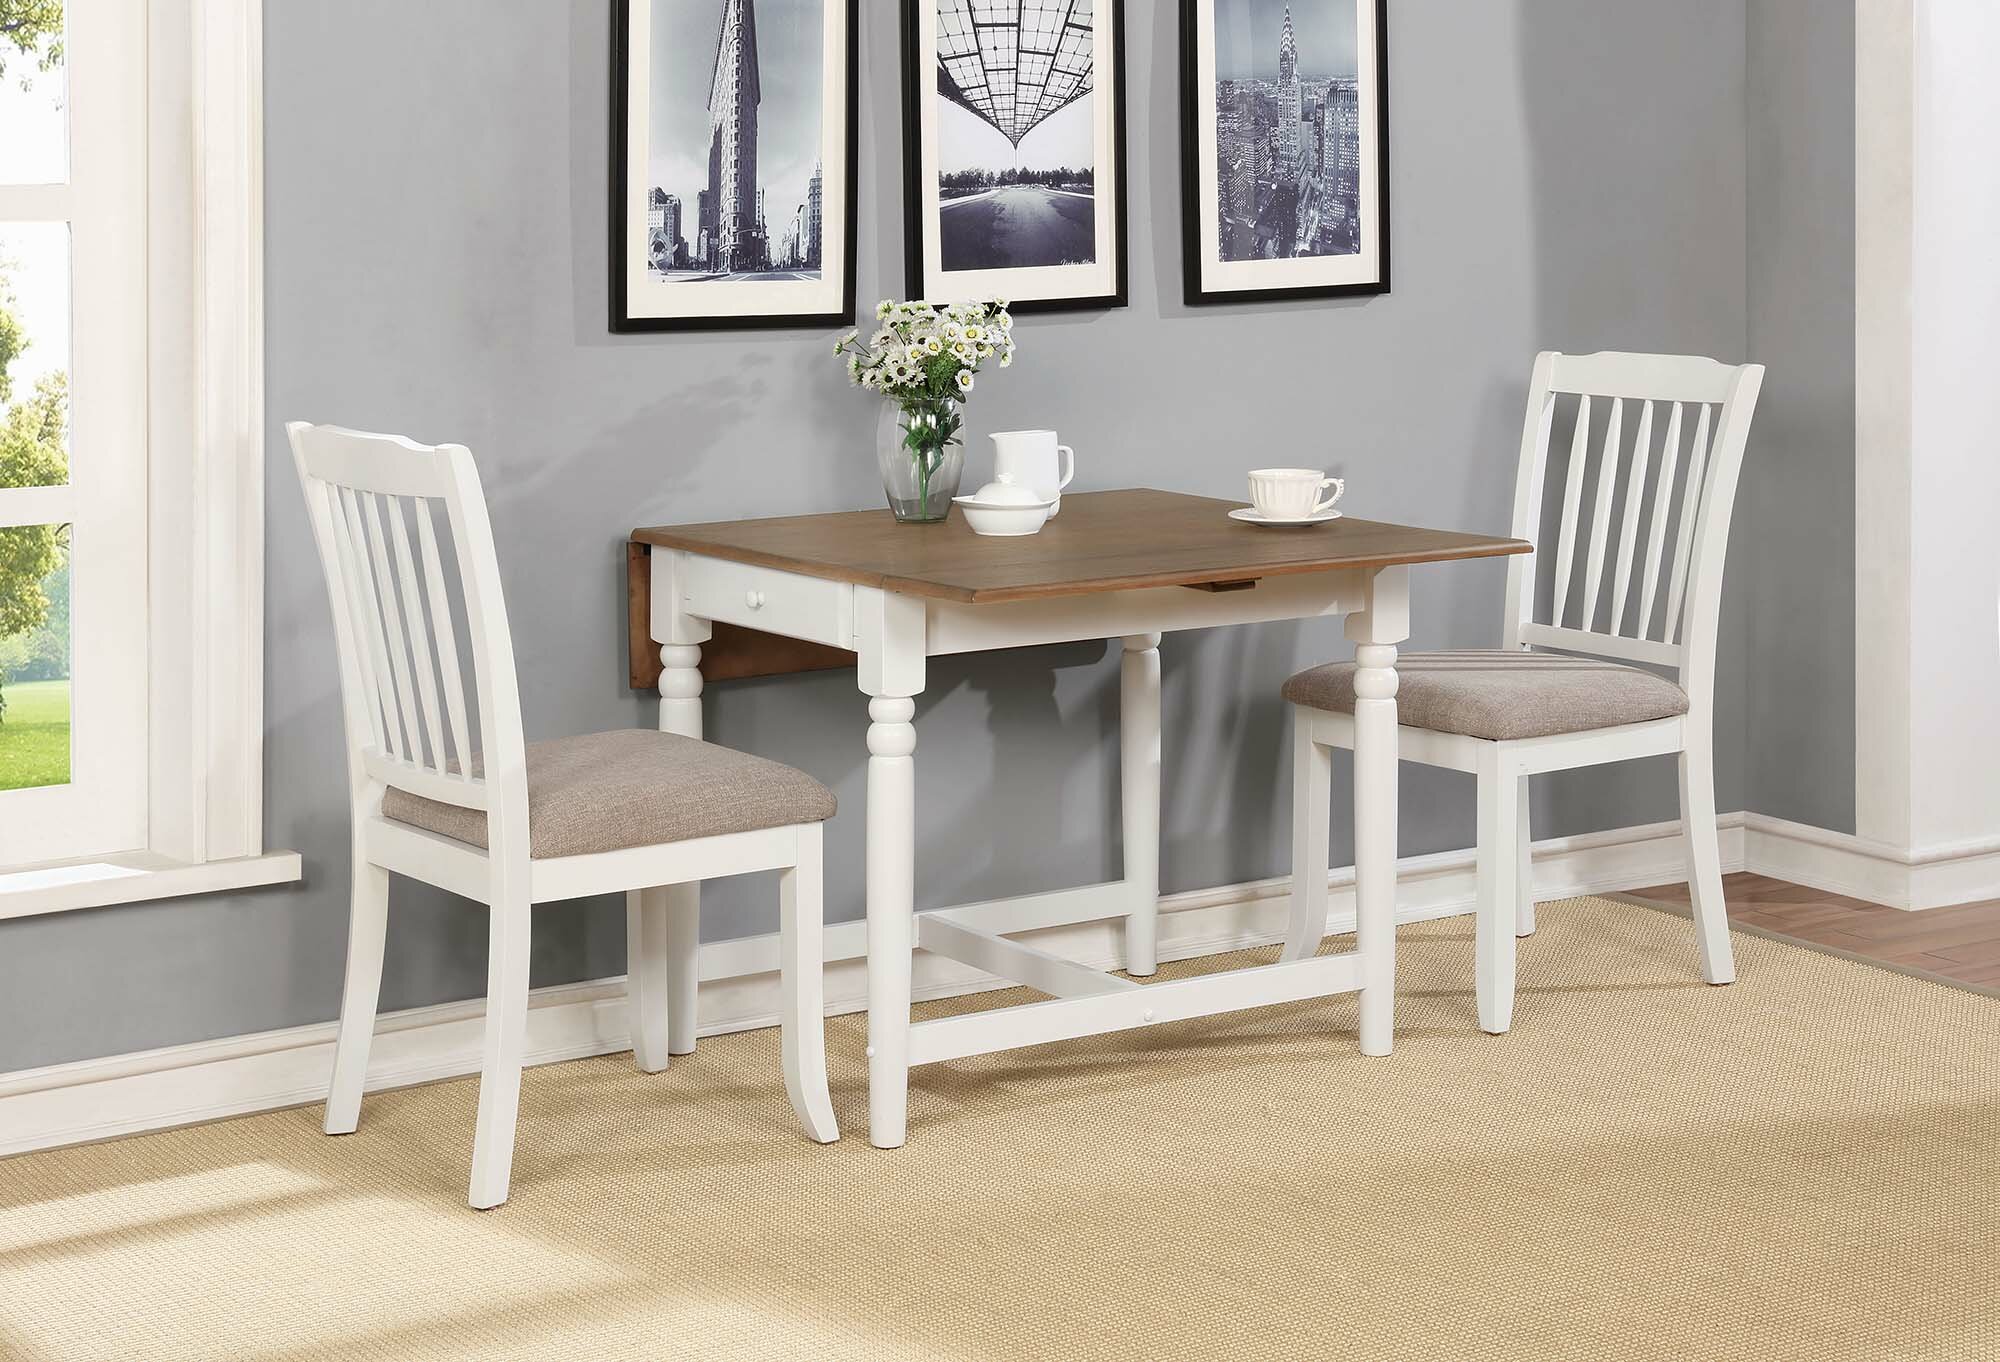 Charlton Home Furr Drop Leaf Dining Table Reviews